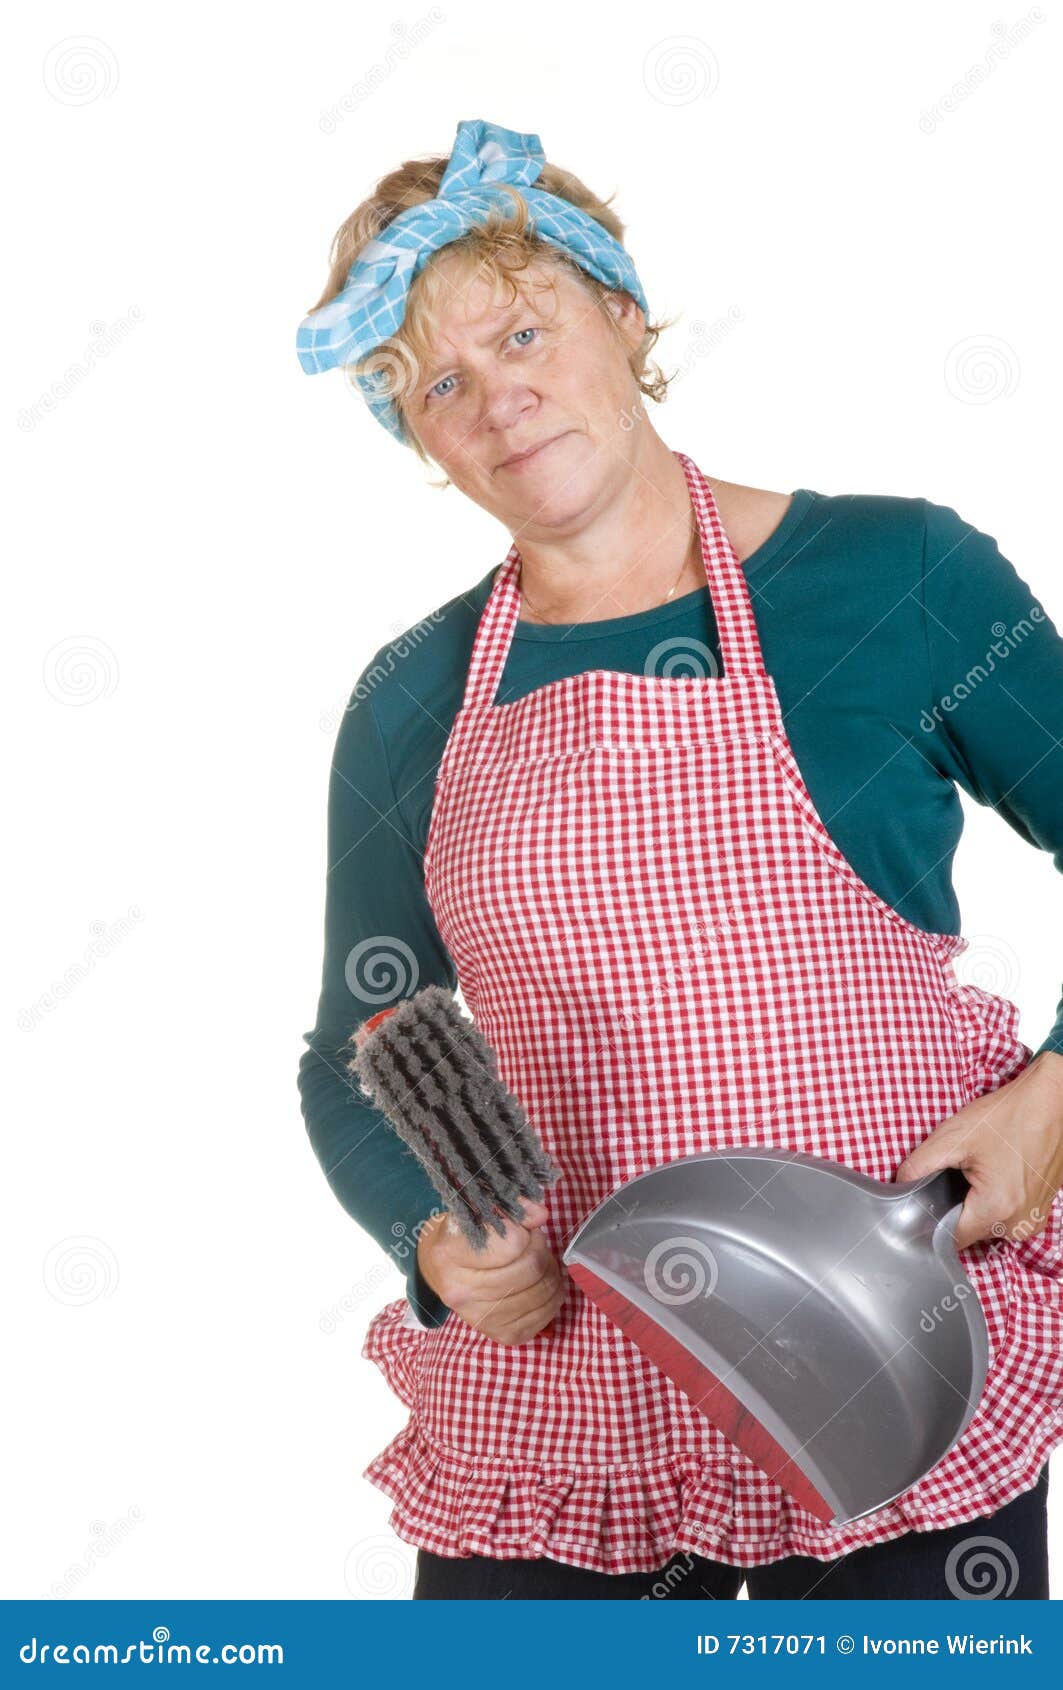 Cleaning house wife stock image. Image of smiling, brush - 7317071